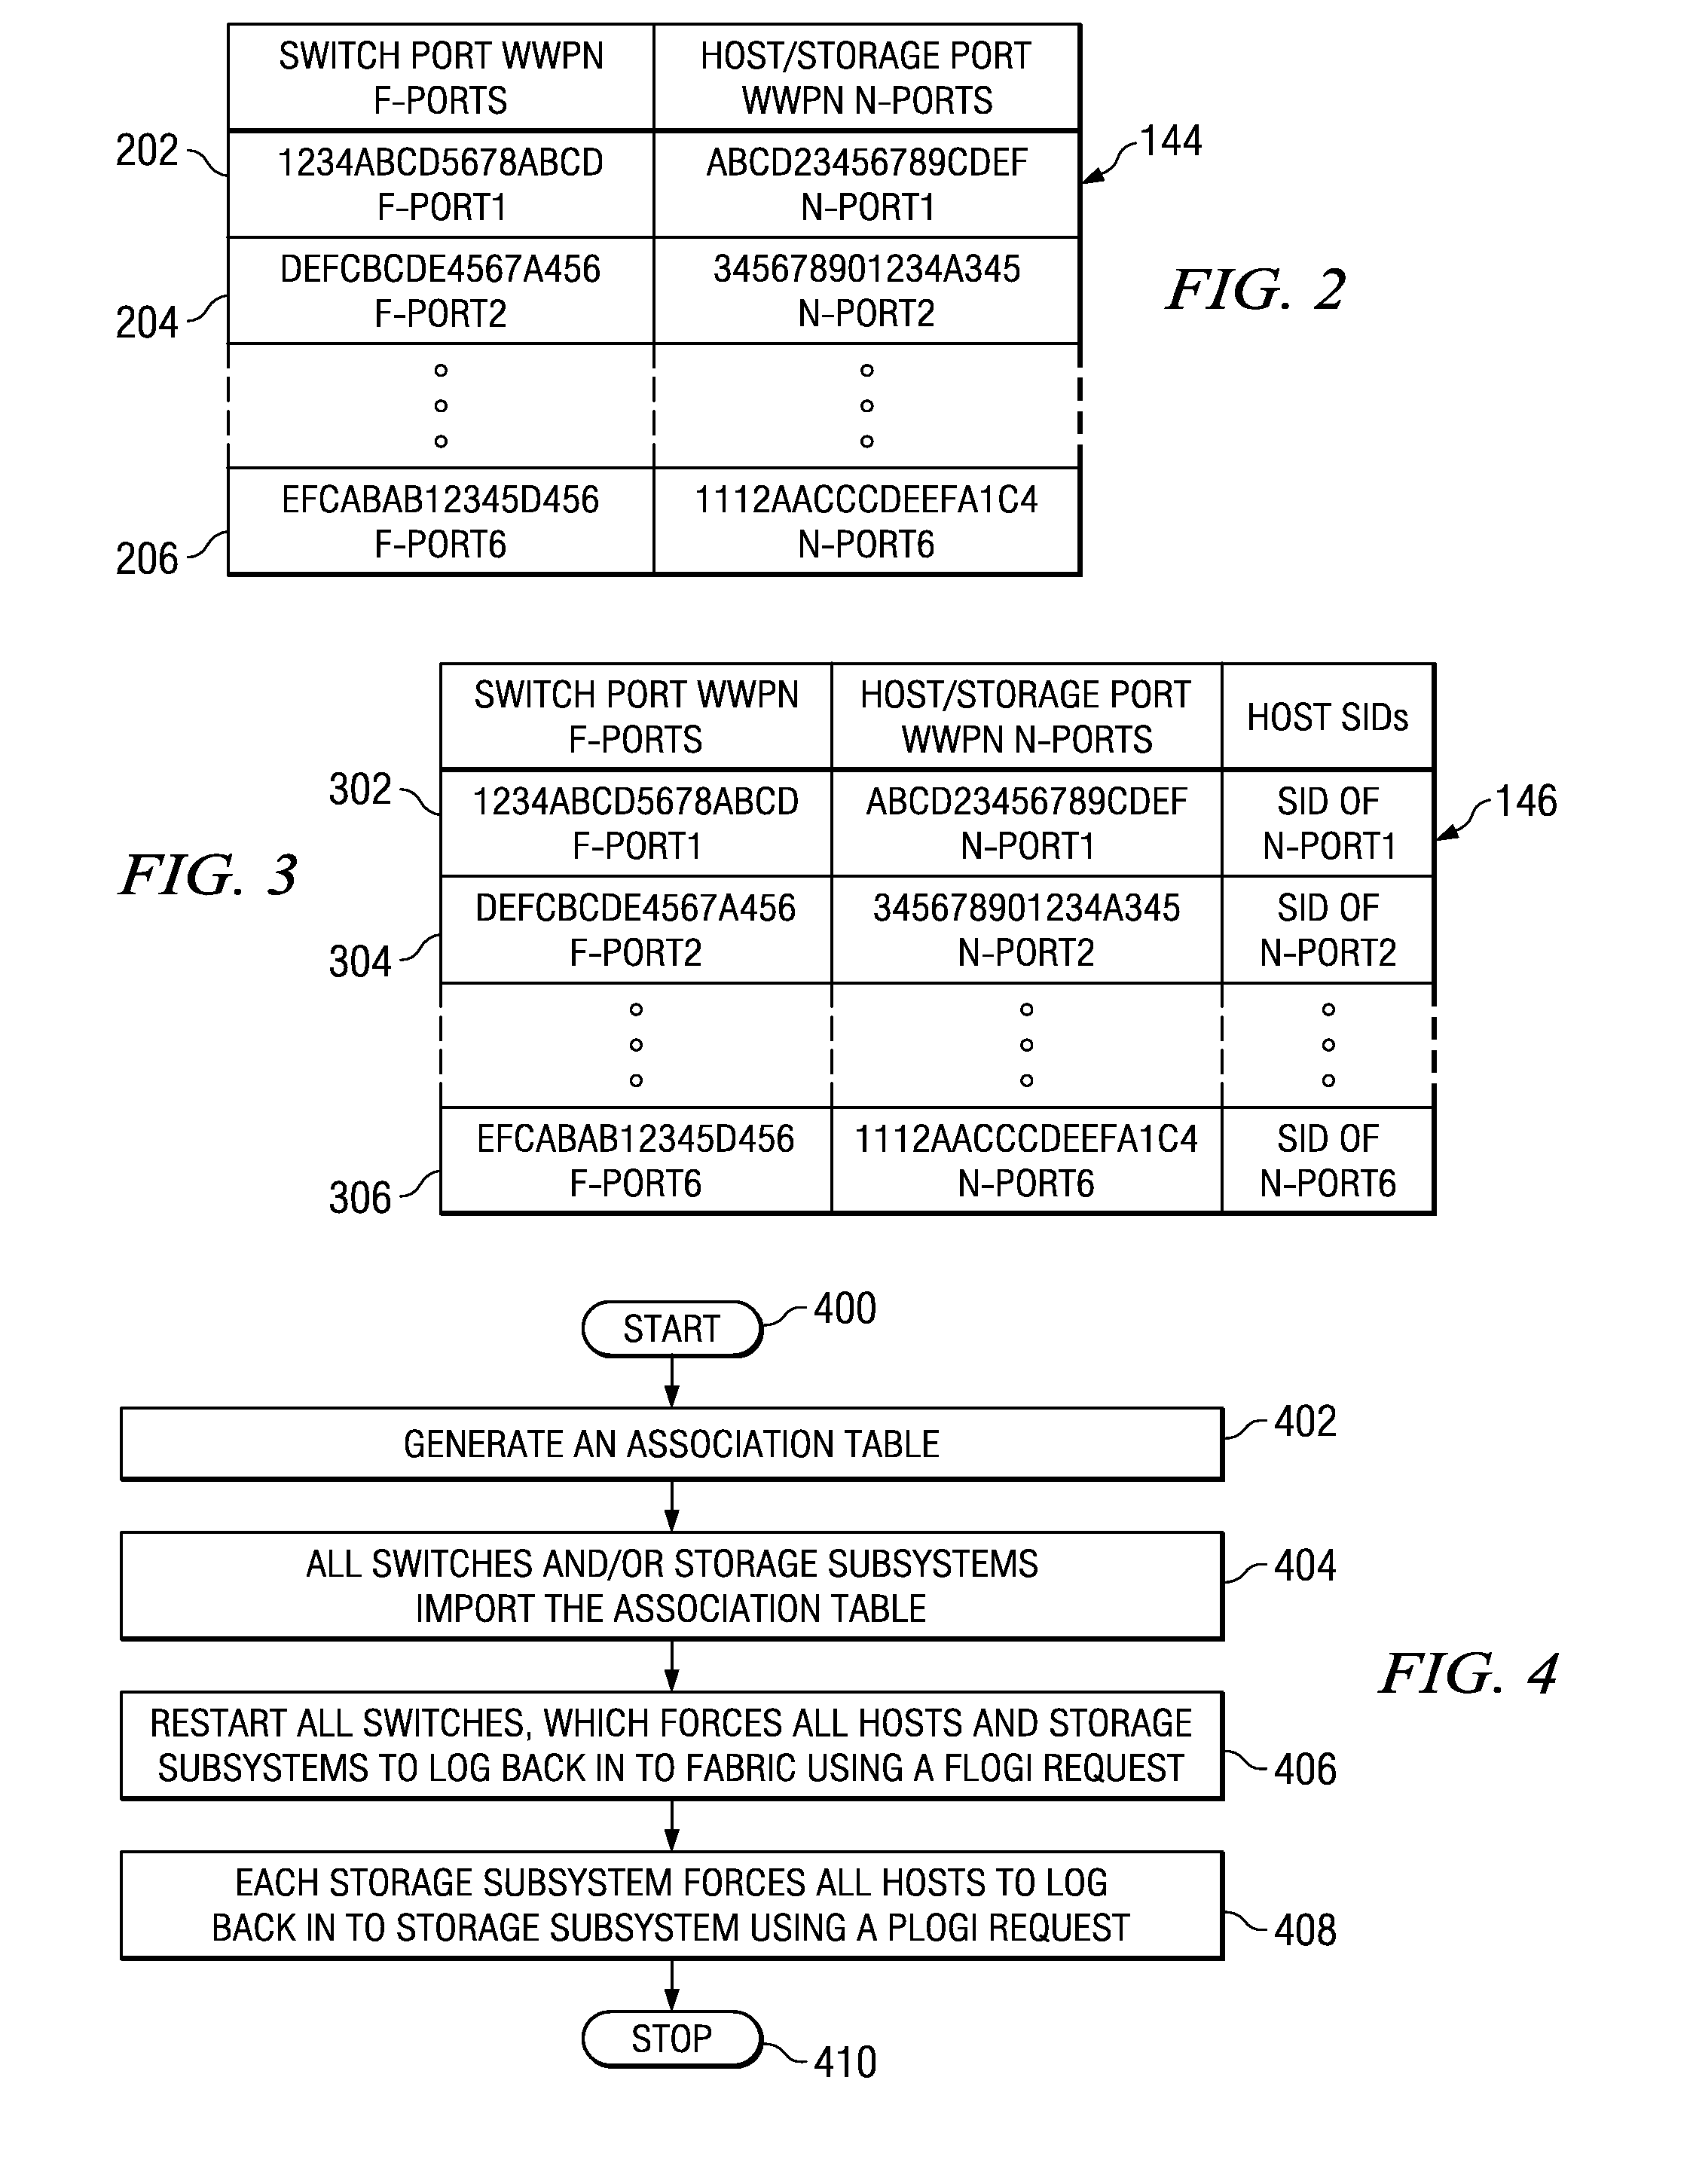 Computer-implemented method, apparatus, and computer program product for securing node port access in a switched-fabric storage area network